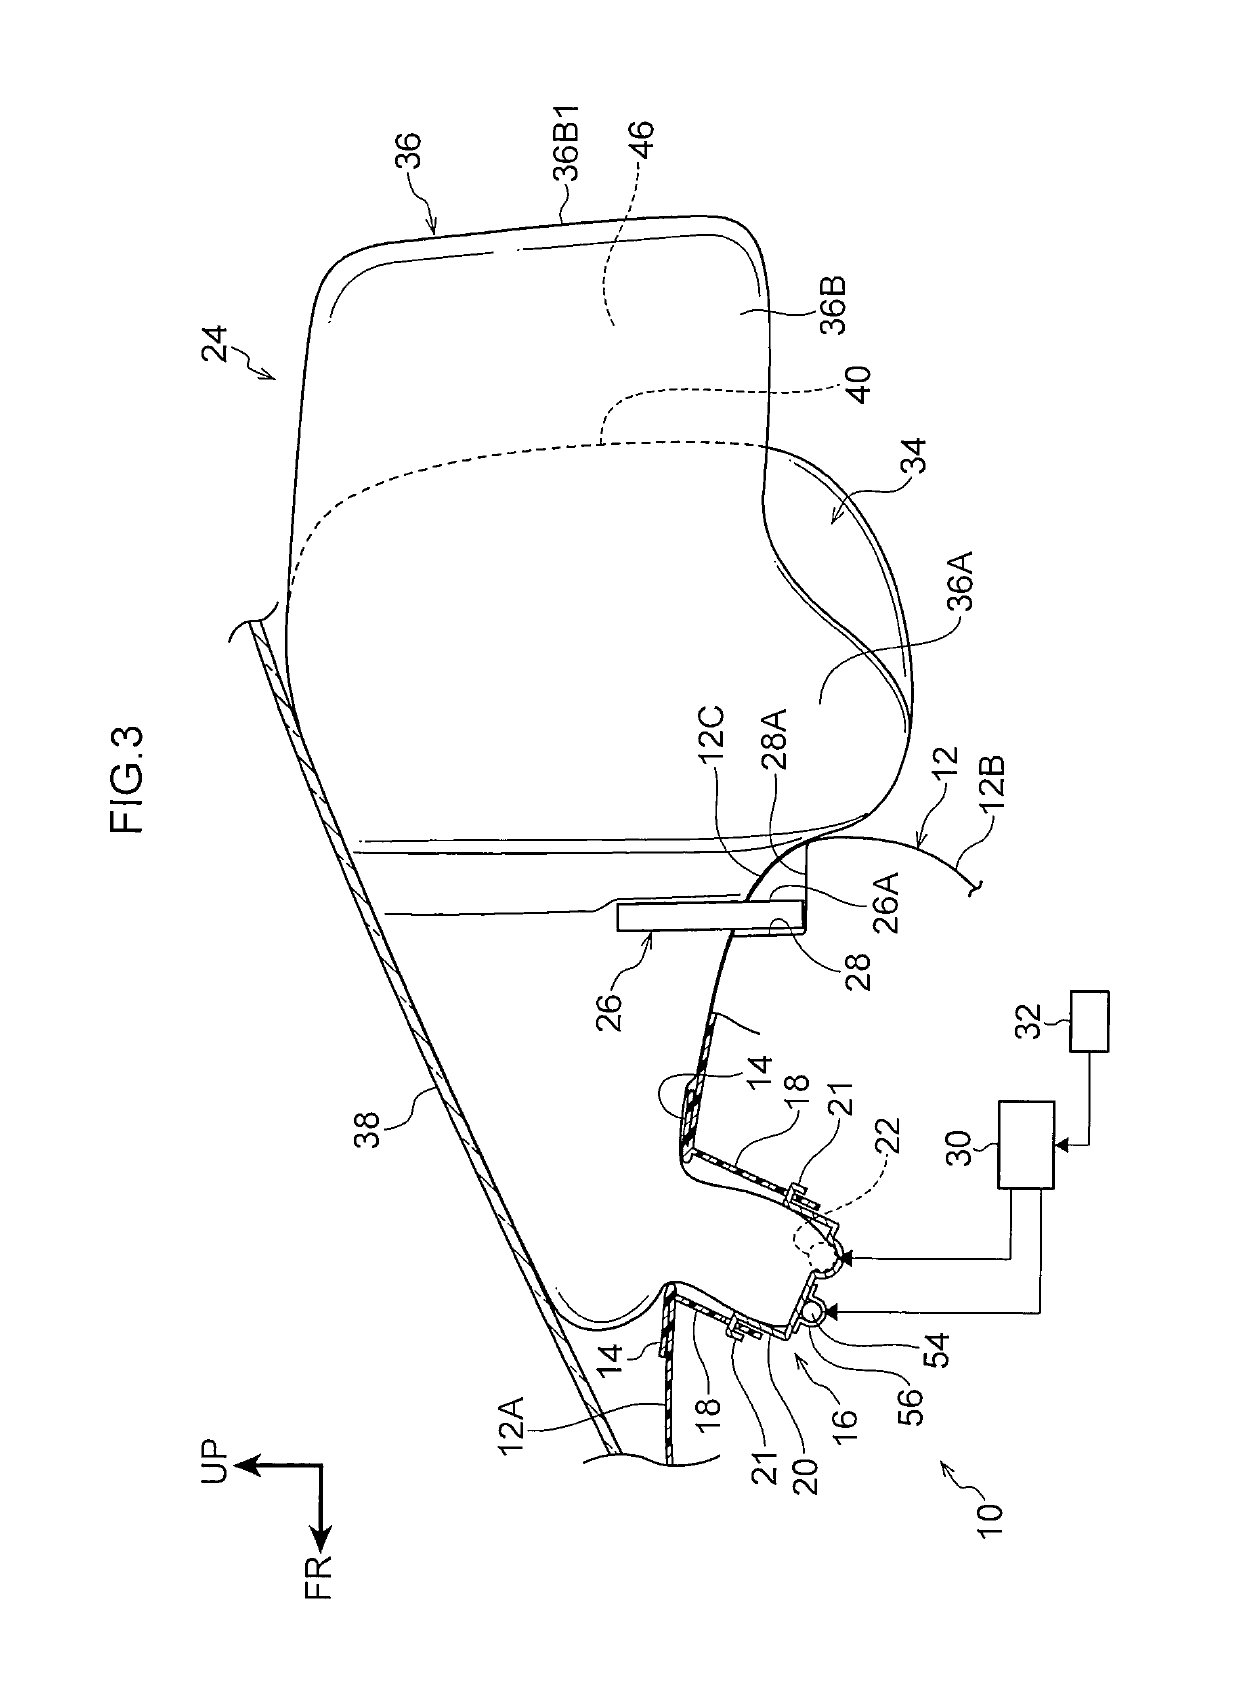 Airbag device for front passenger seat